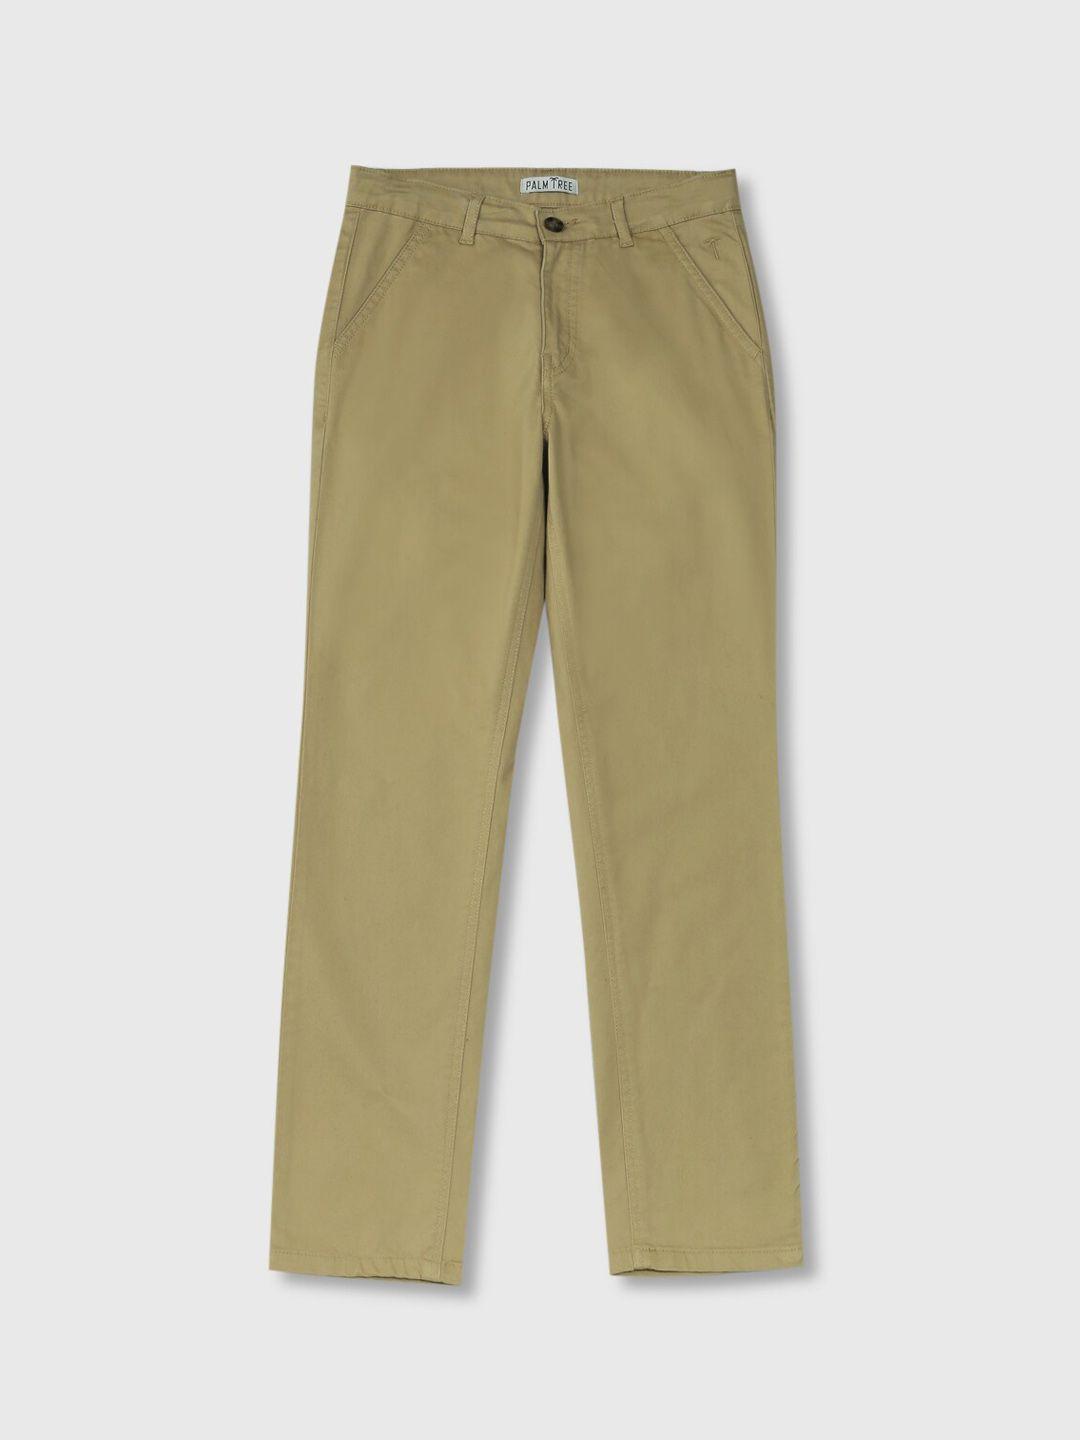 palm tree boys mid rise cotton chinos trousers